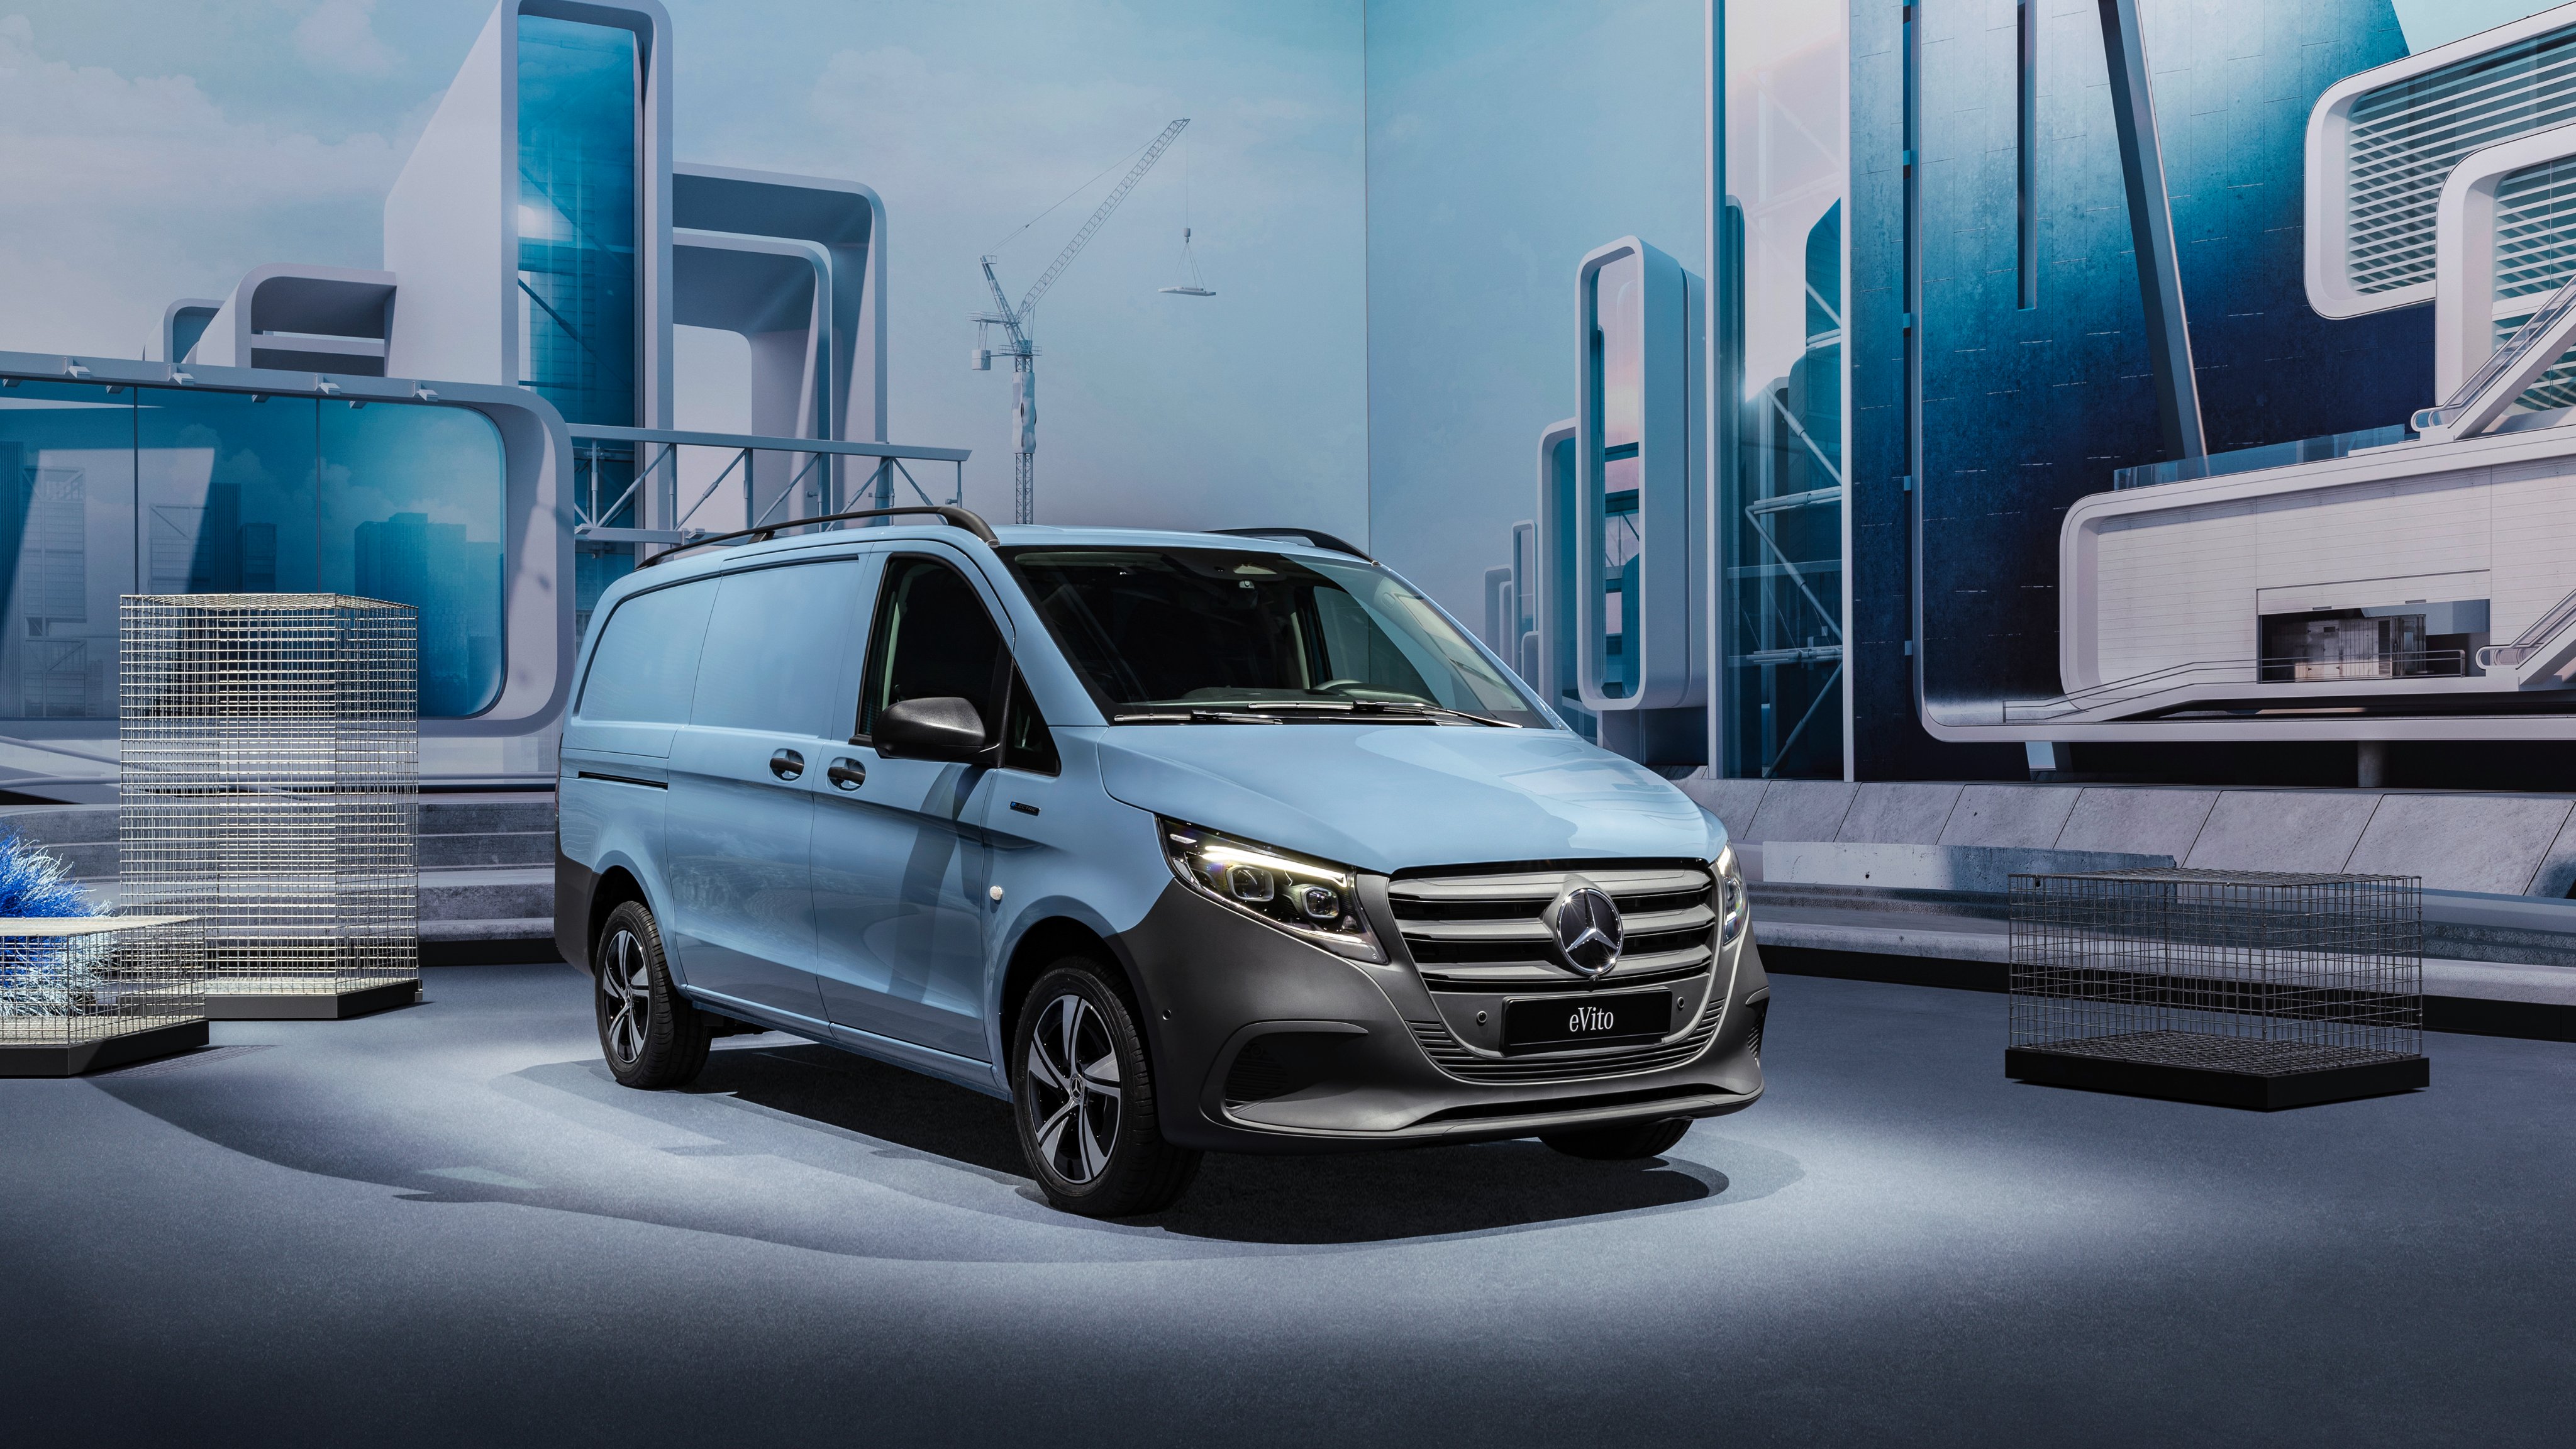 Mercedes-Benz Press on X: The new front design of the new #eVito and #Vito  is characterised by a striking radiator grille & powerfully drawn bumper  making them more modern and dynamic. The